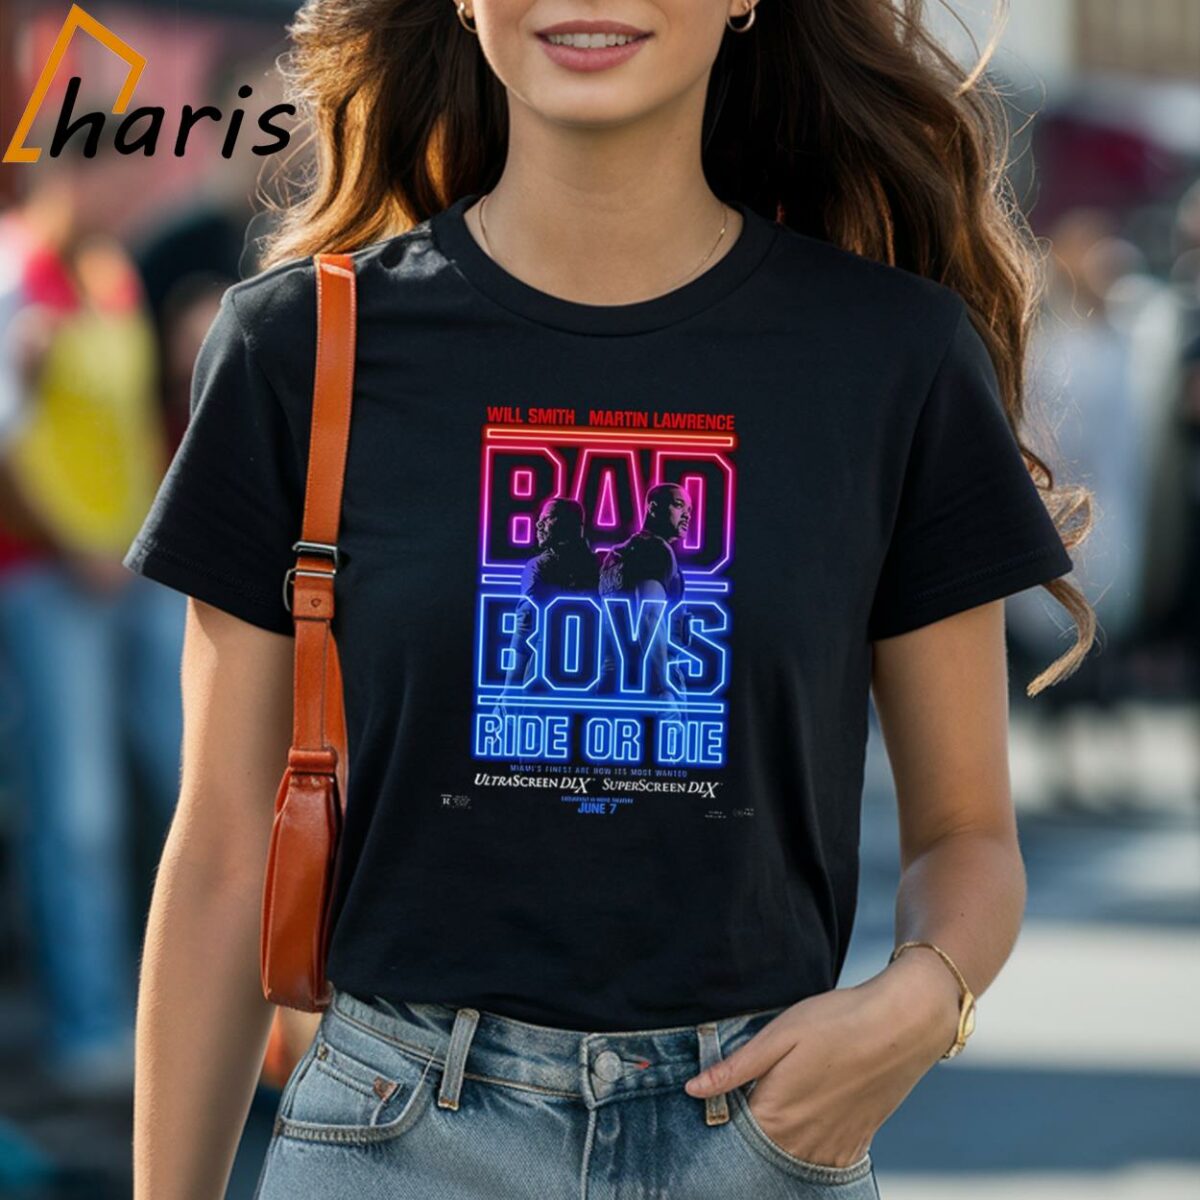 Will Smith Martin Lawrence Bad Boys Ride Or Die June 7 Poster T shirt 1 Shirt